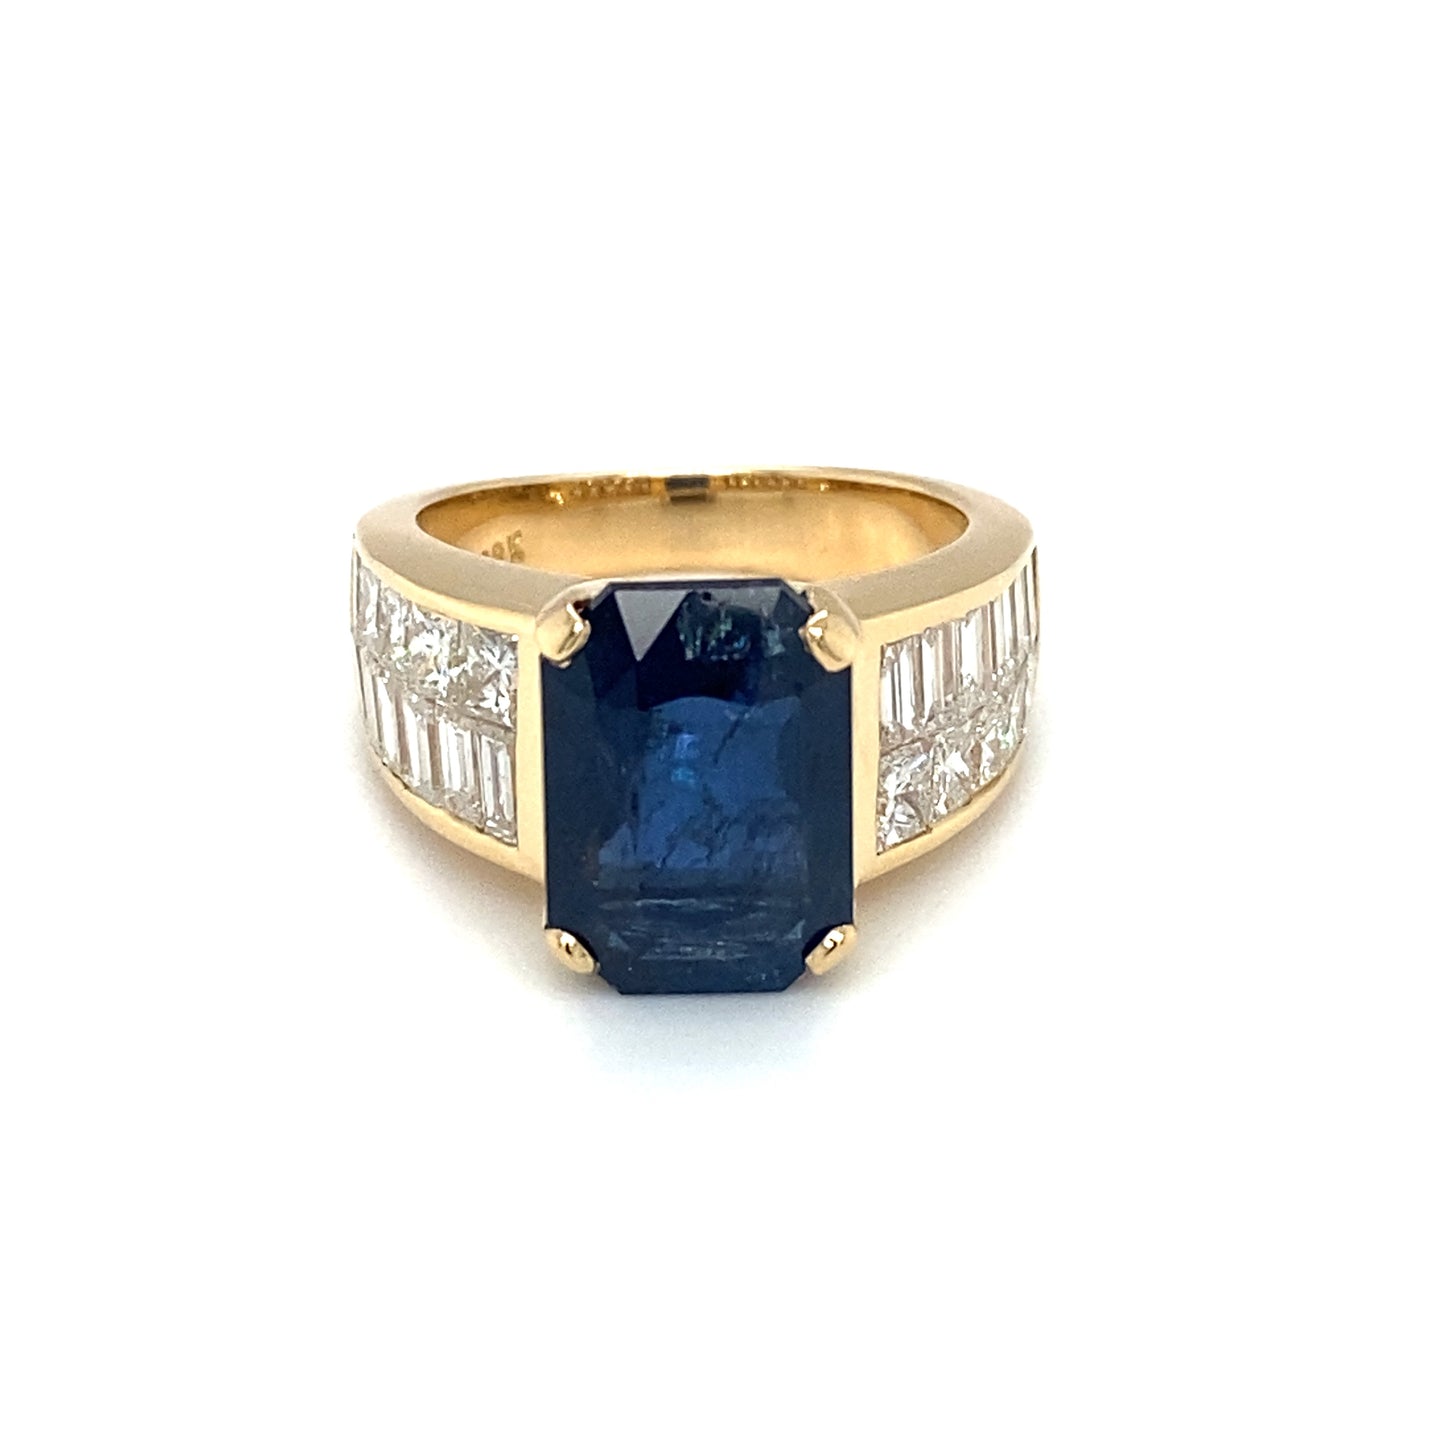 GIA 6.35ct Emerald Cut Sapphire and Diamond Cocktail Ring in 18K Gold